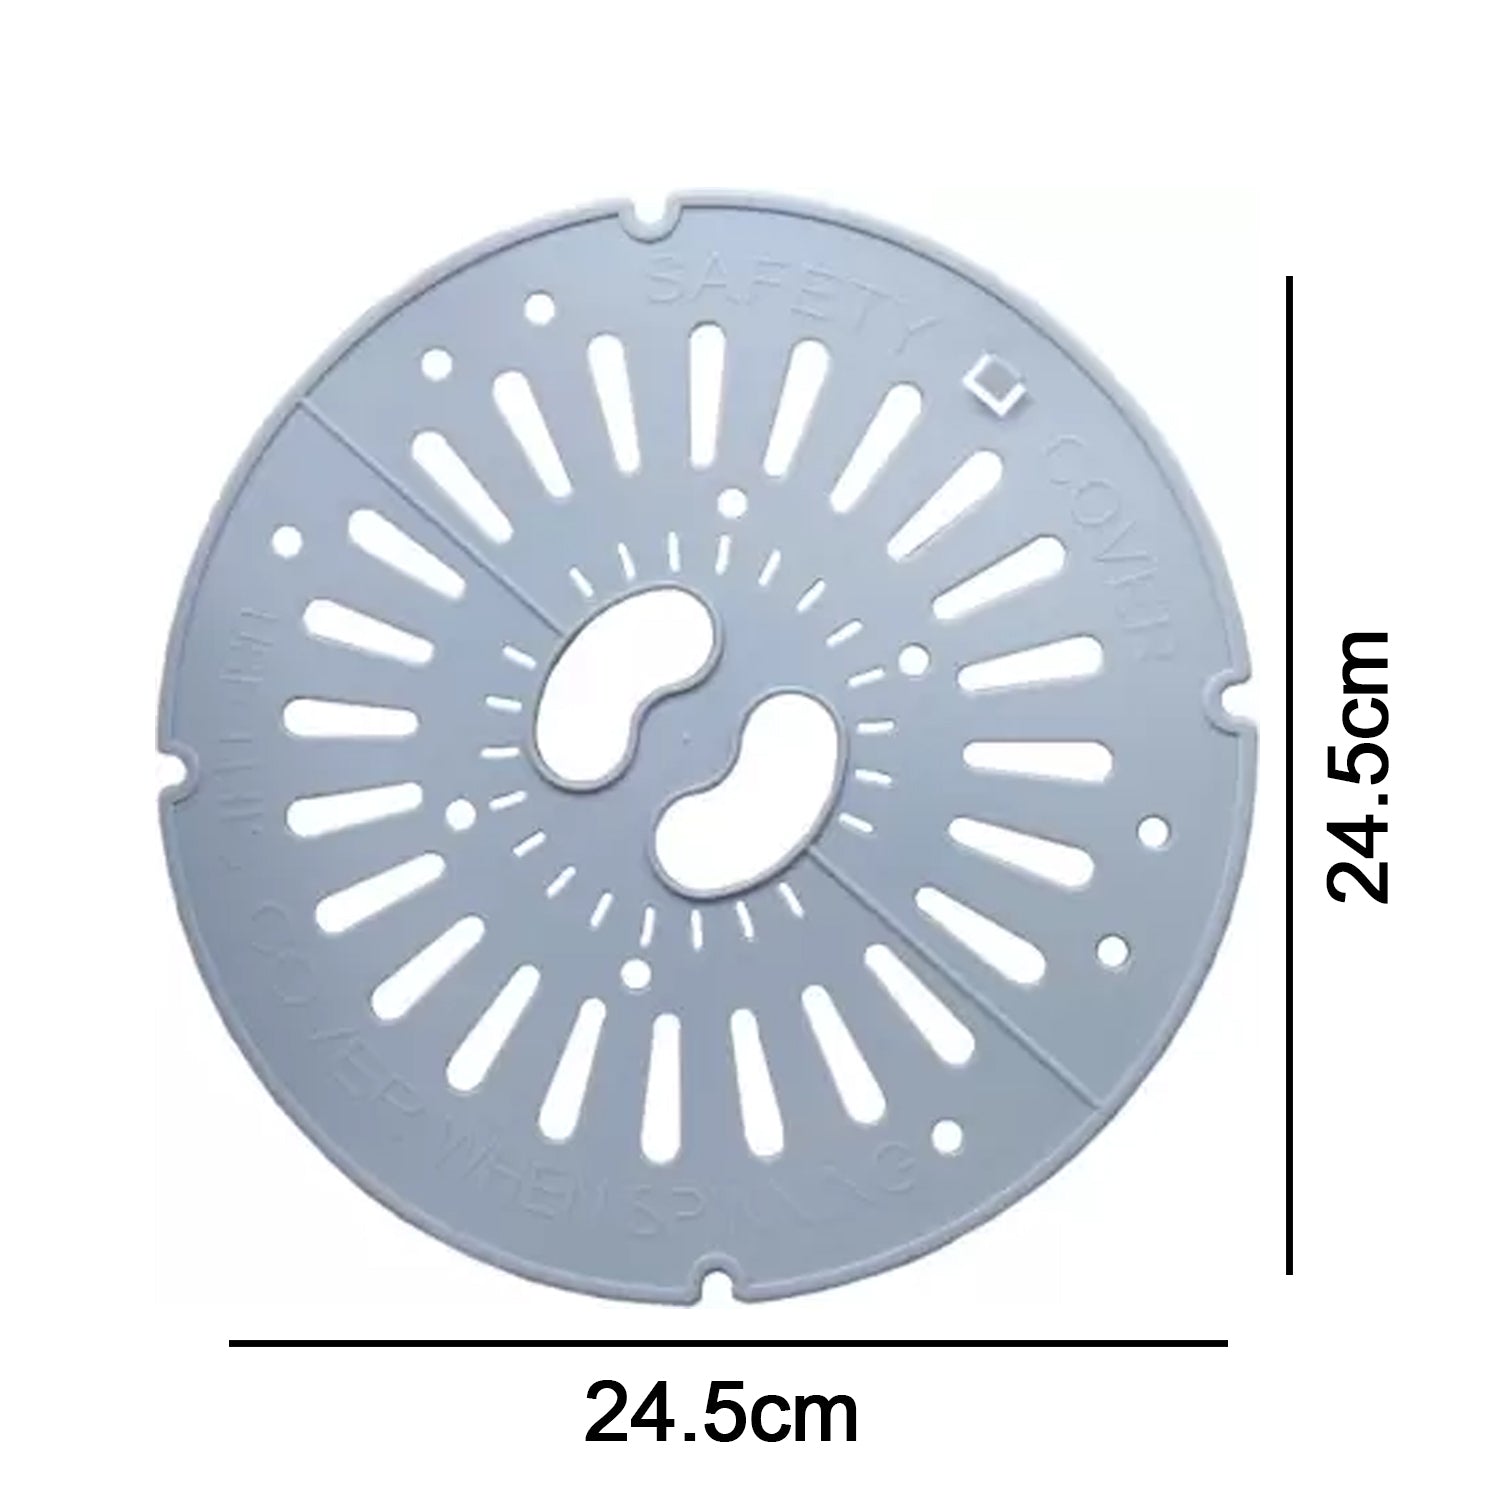 Universal Fit Top Load Semi Automatic Washing Machine Spin Safety Cover / Spinner Cap / Dryer Safety Cover / Lid & Plate (1 pc)